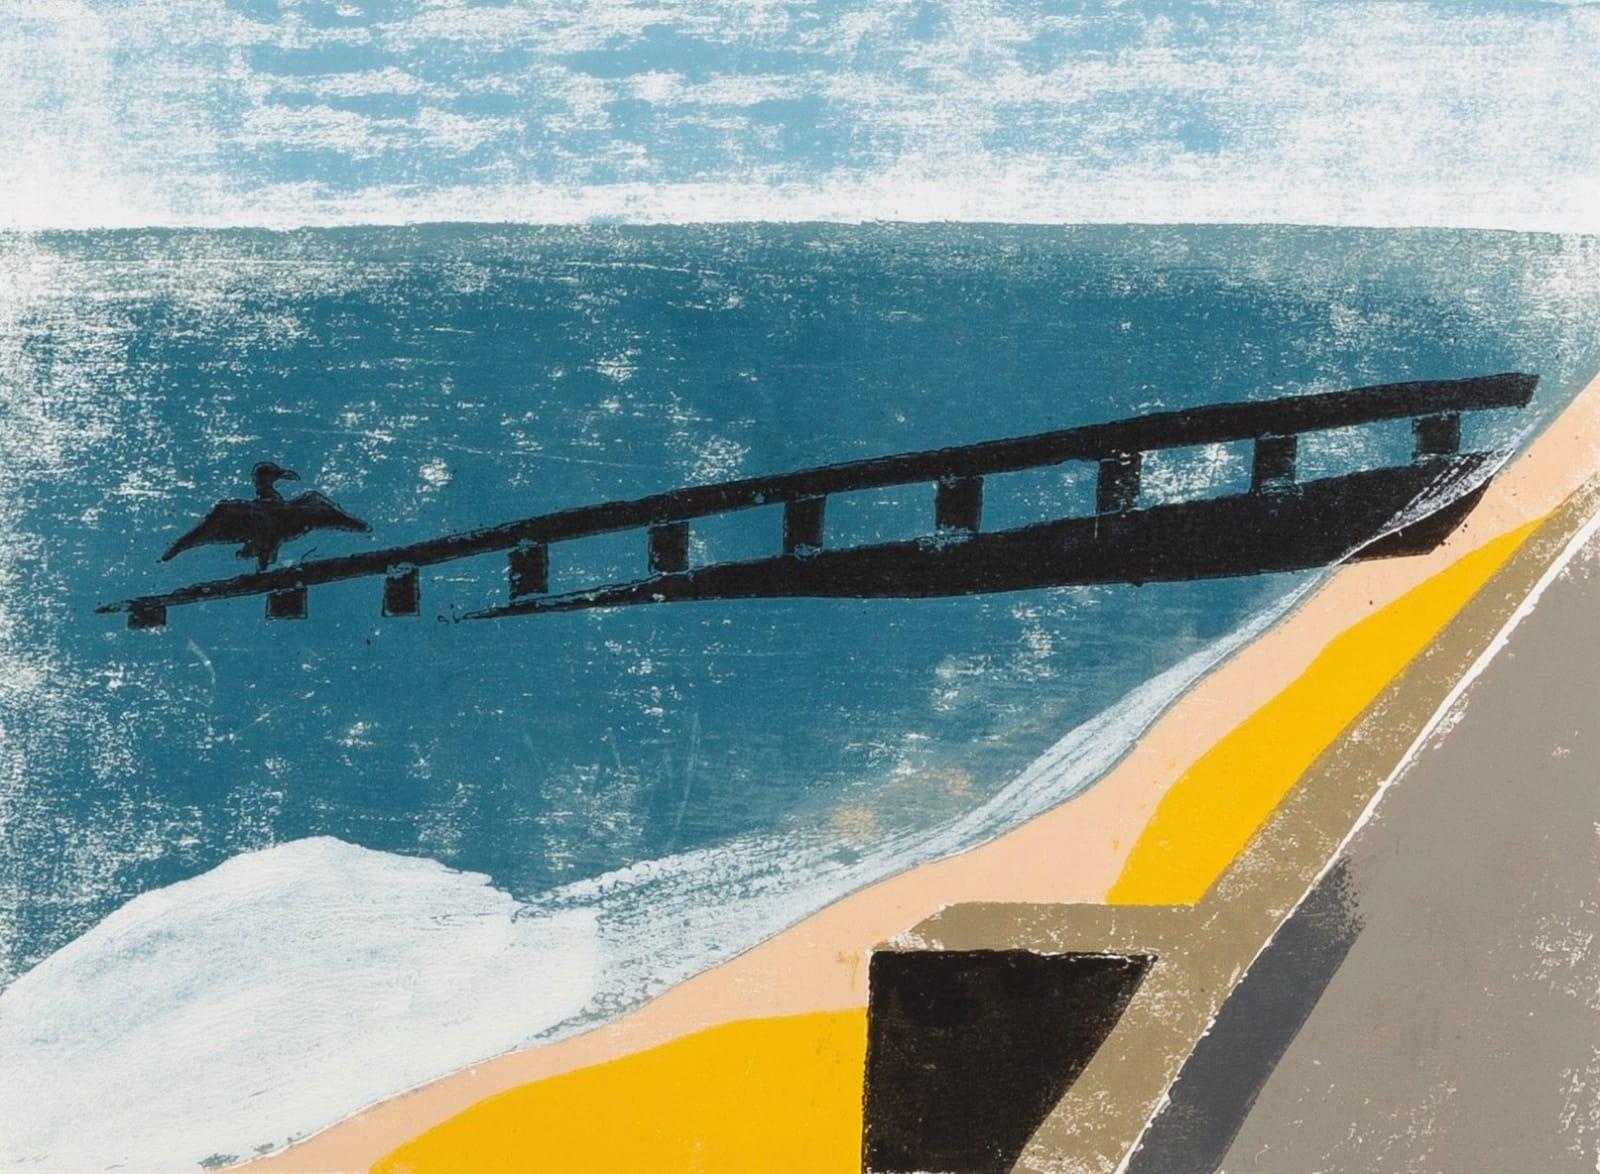 Sandgate Painting by Keith Purser B. 1944, 2009

Additional information:
Medium: Woodcut with hand-colouring
Dimensions: 42 x 53 cm
16 1/2 x 20 7/8 in
Signed, titled and dated.

Keith Purser lives and works on the edge of the desert-like environment